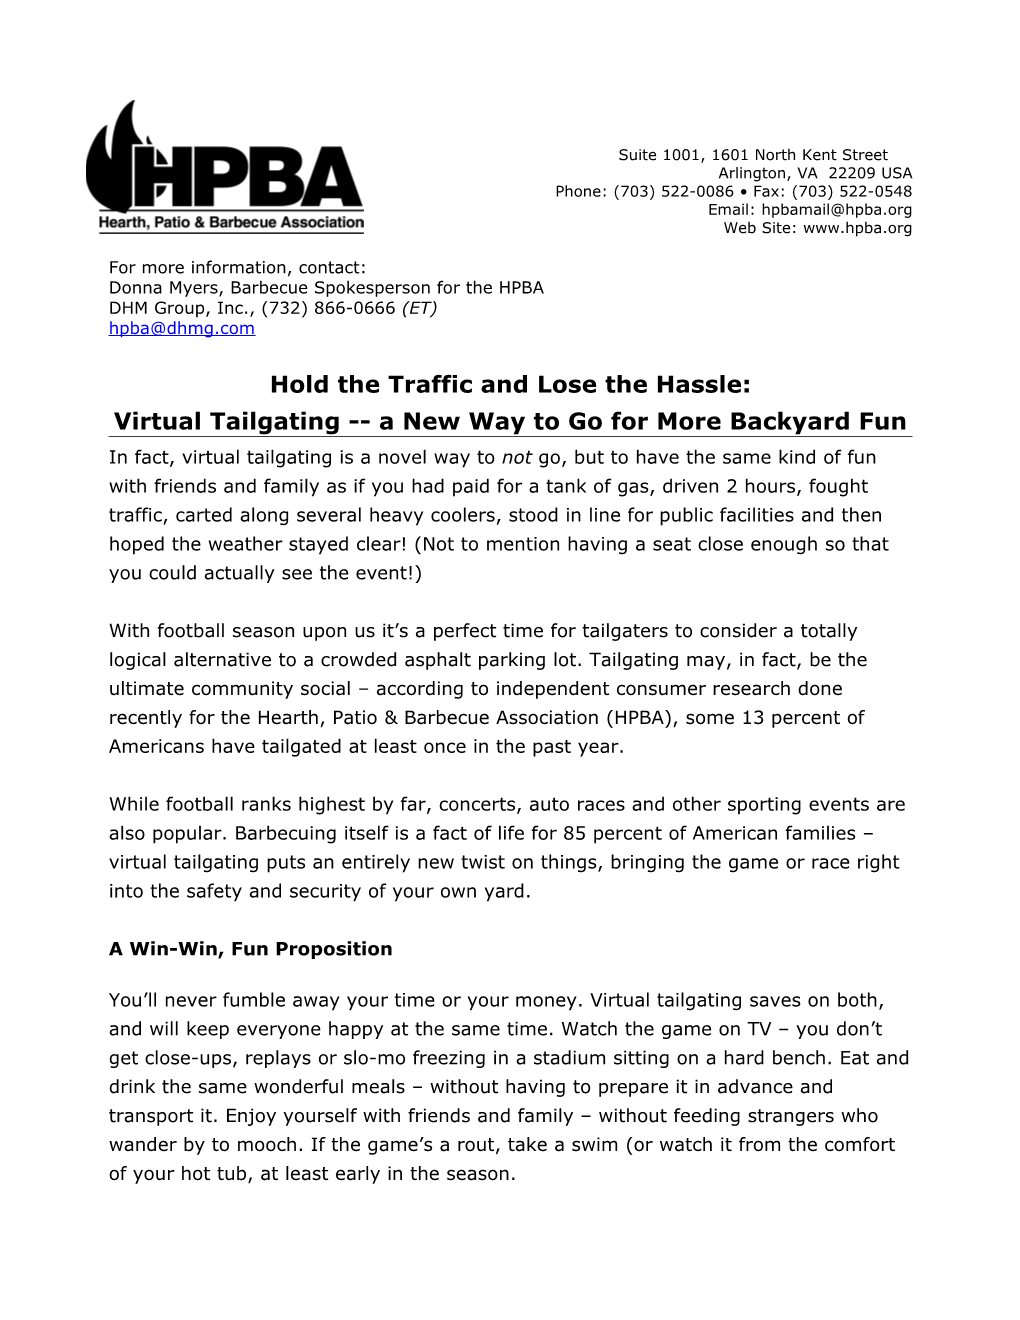 Donna Myers, Barbecue Spokesperson for the HPBA